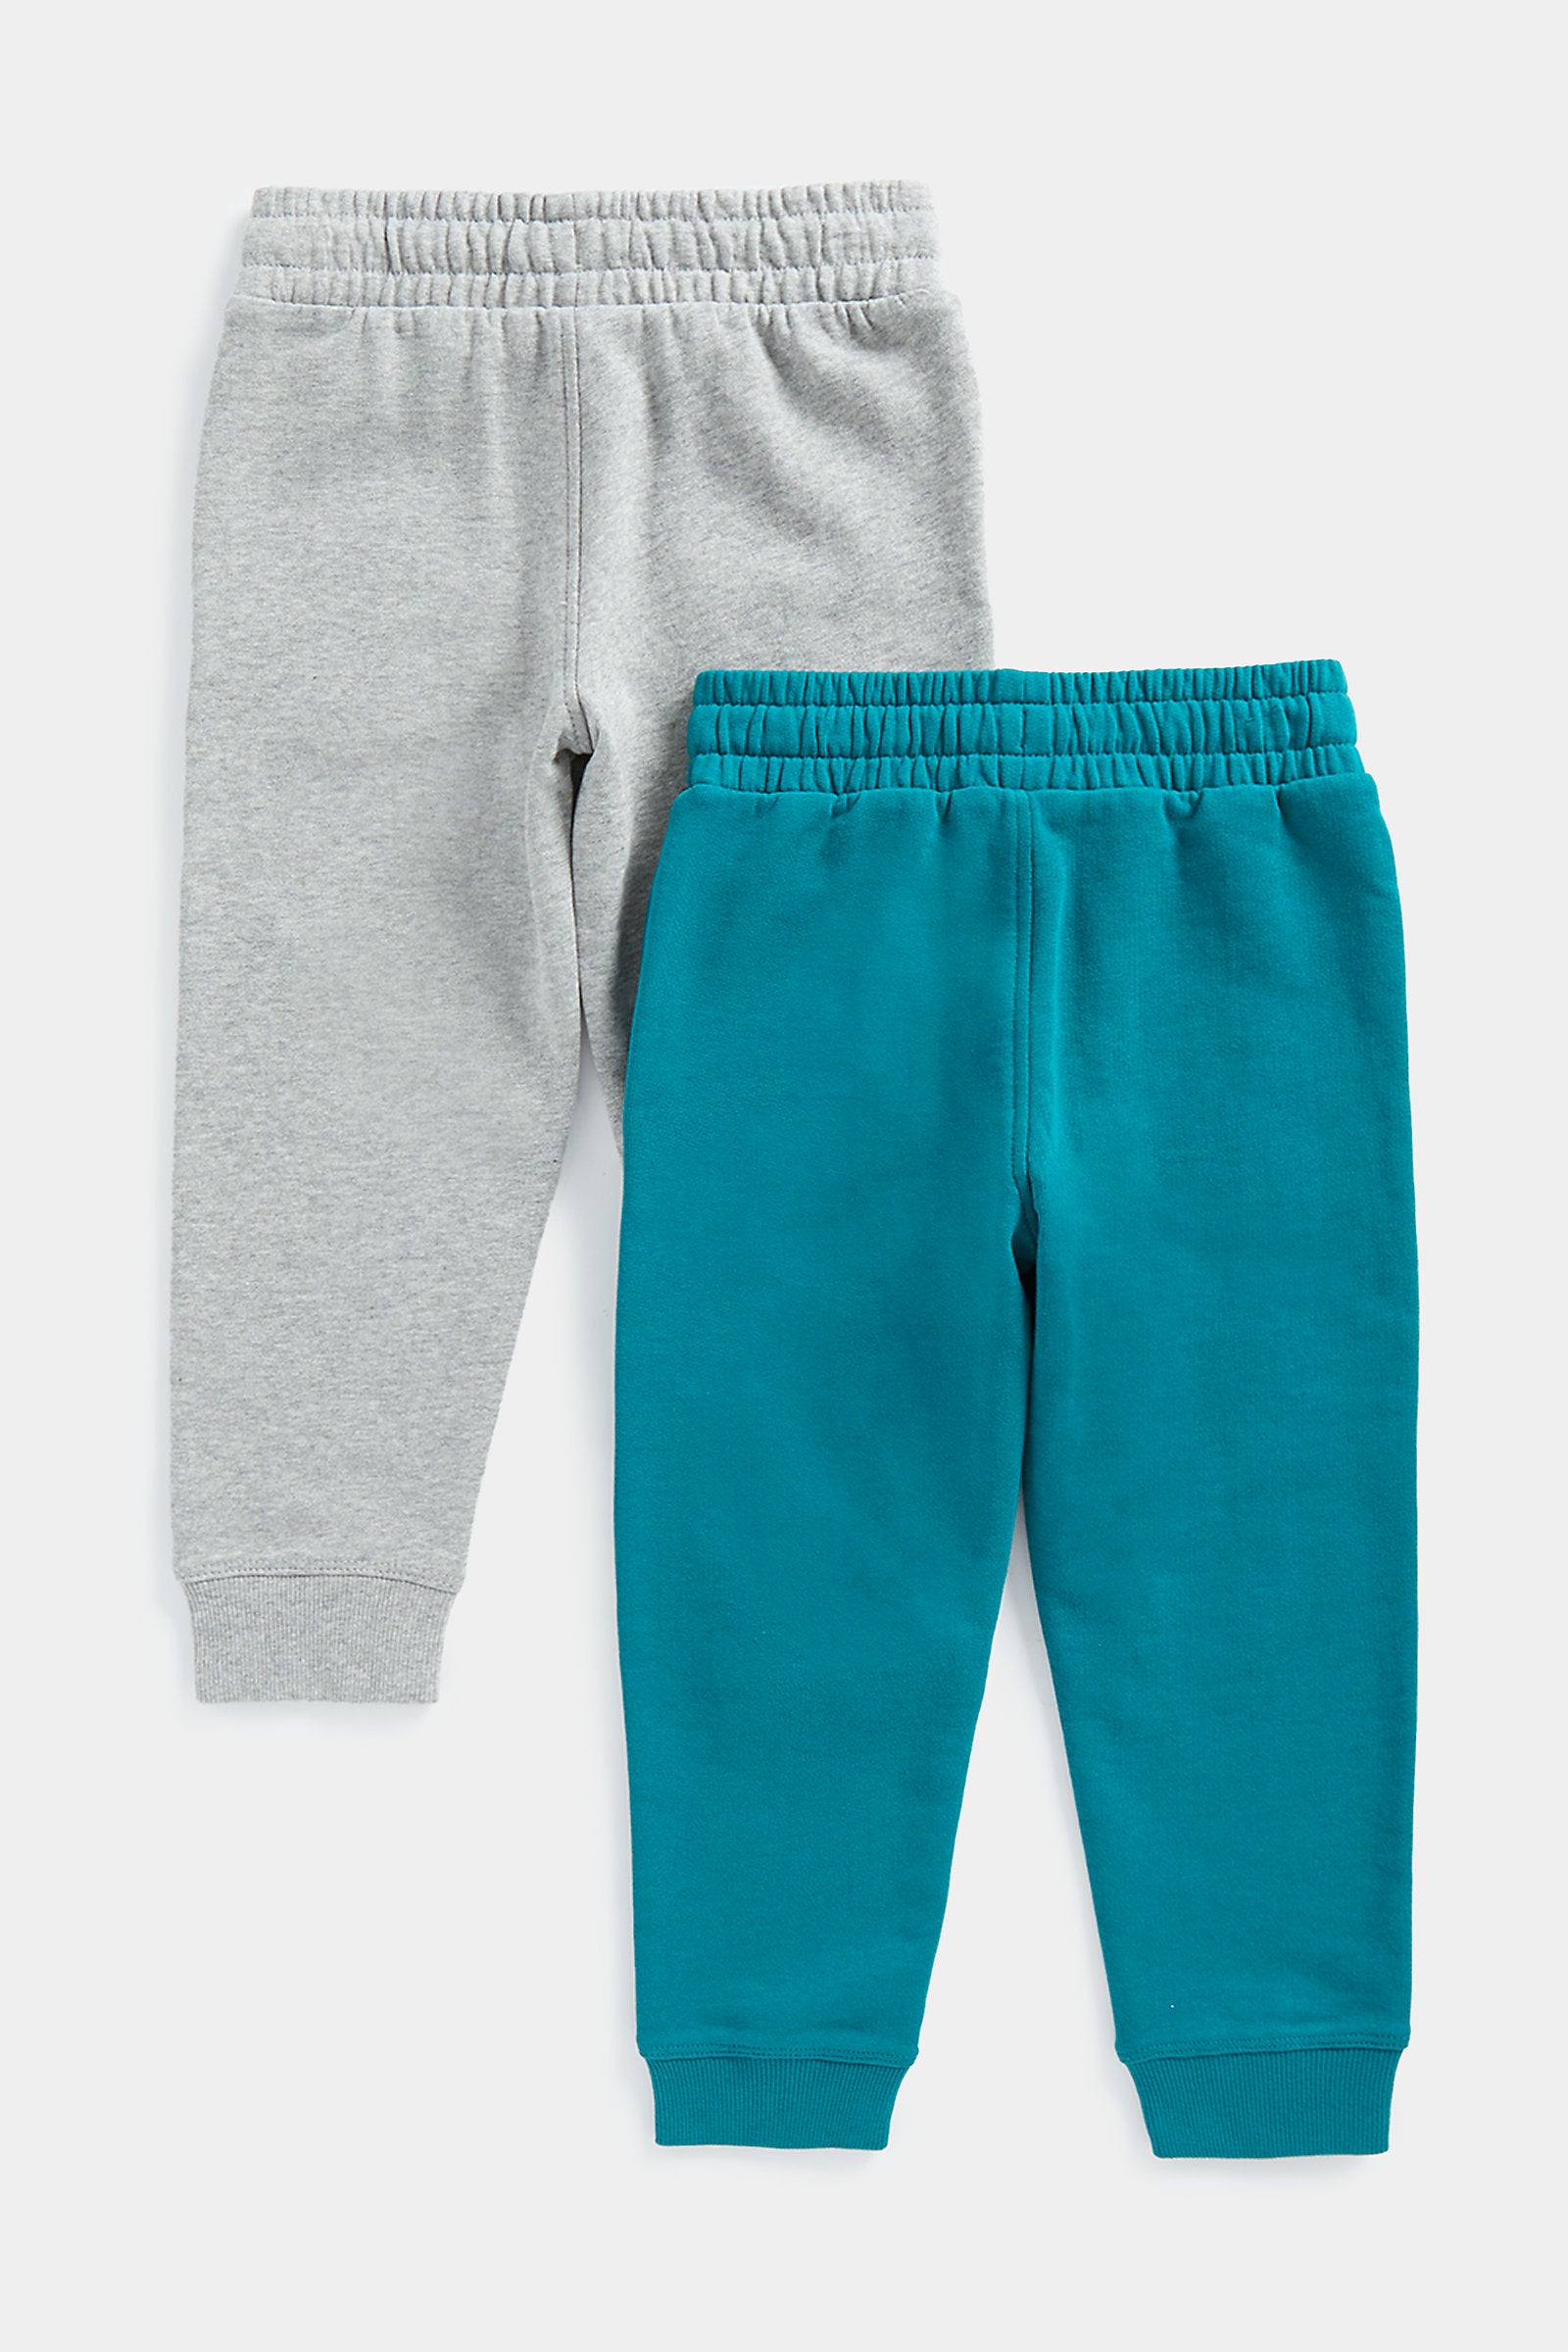 Mothercare Grey and Teal Joggers - 2 Pack